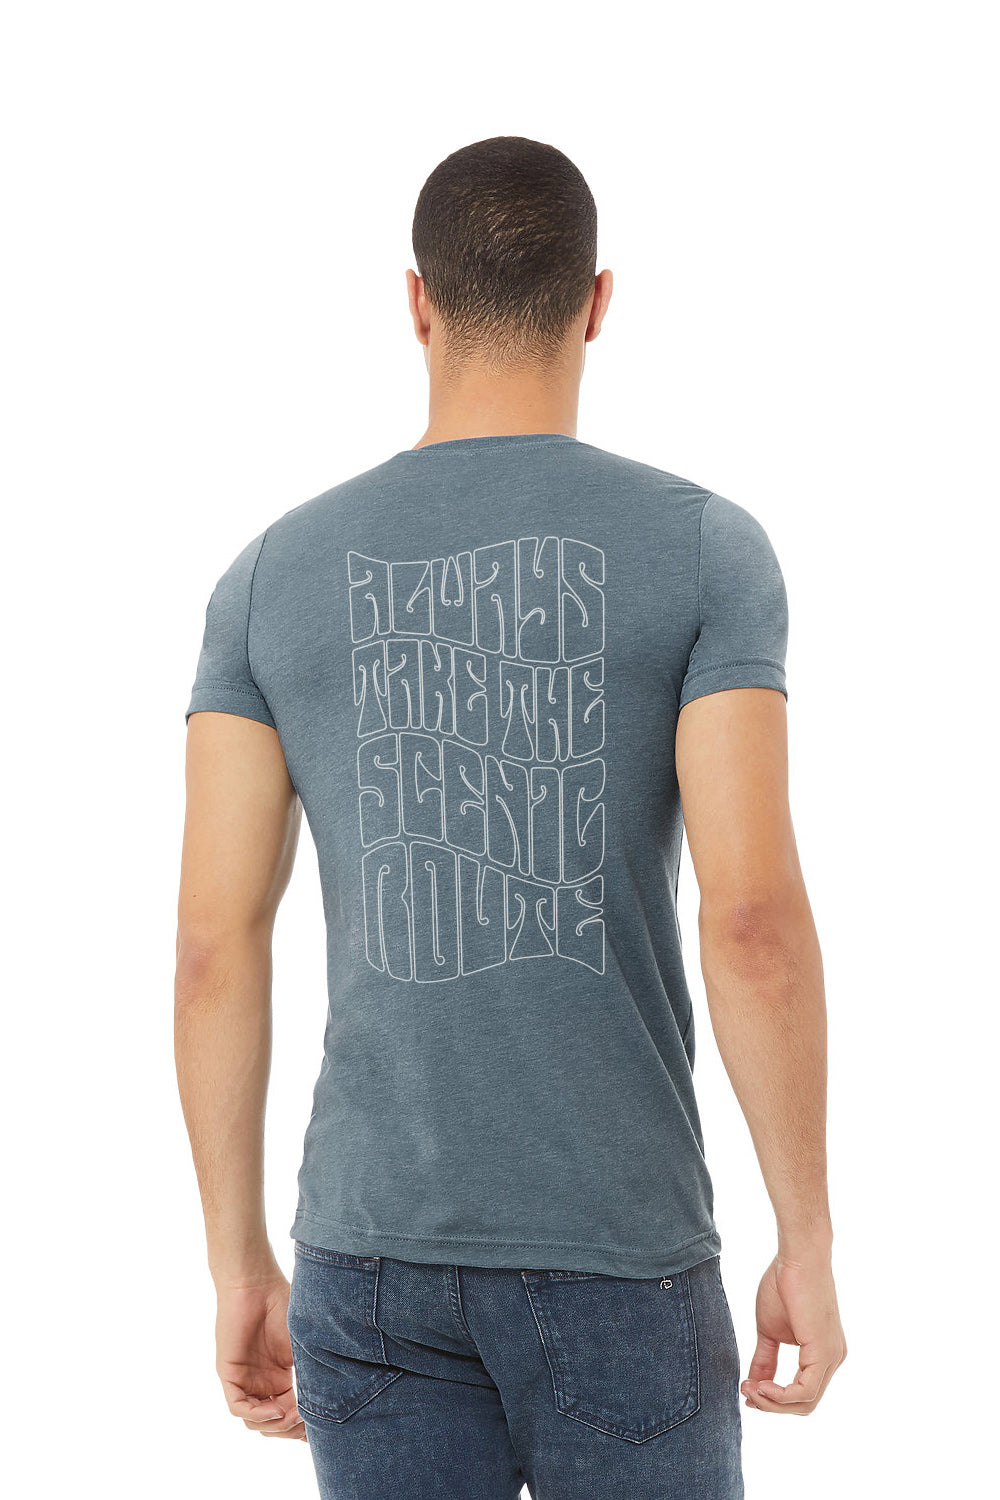 Always Take the Scenic Route T-Shirt (Heather Blue)